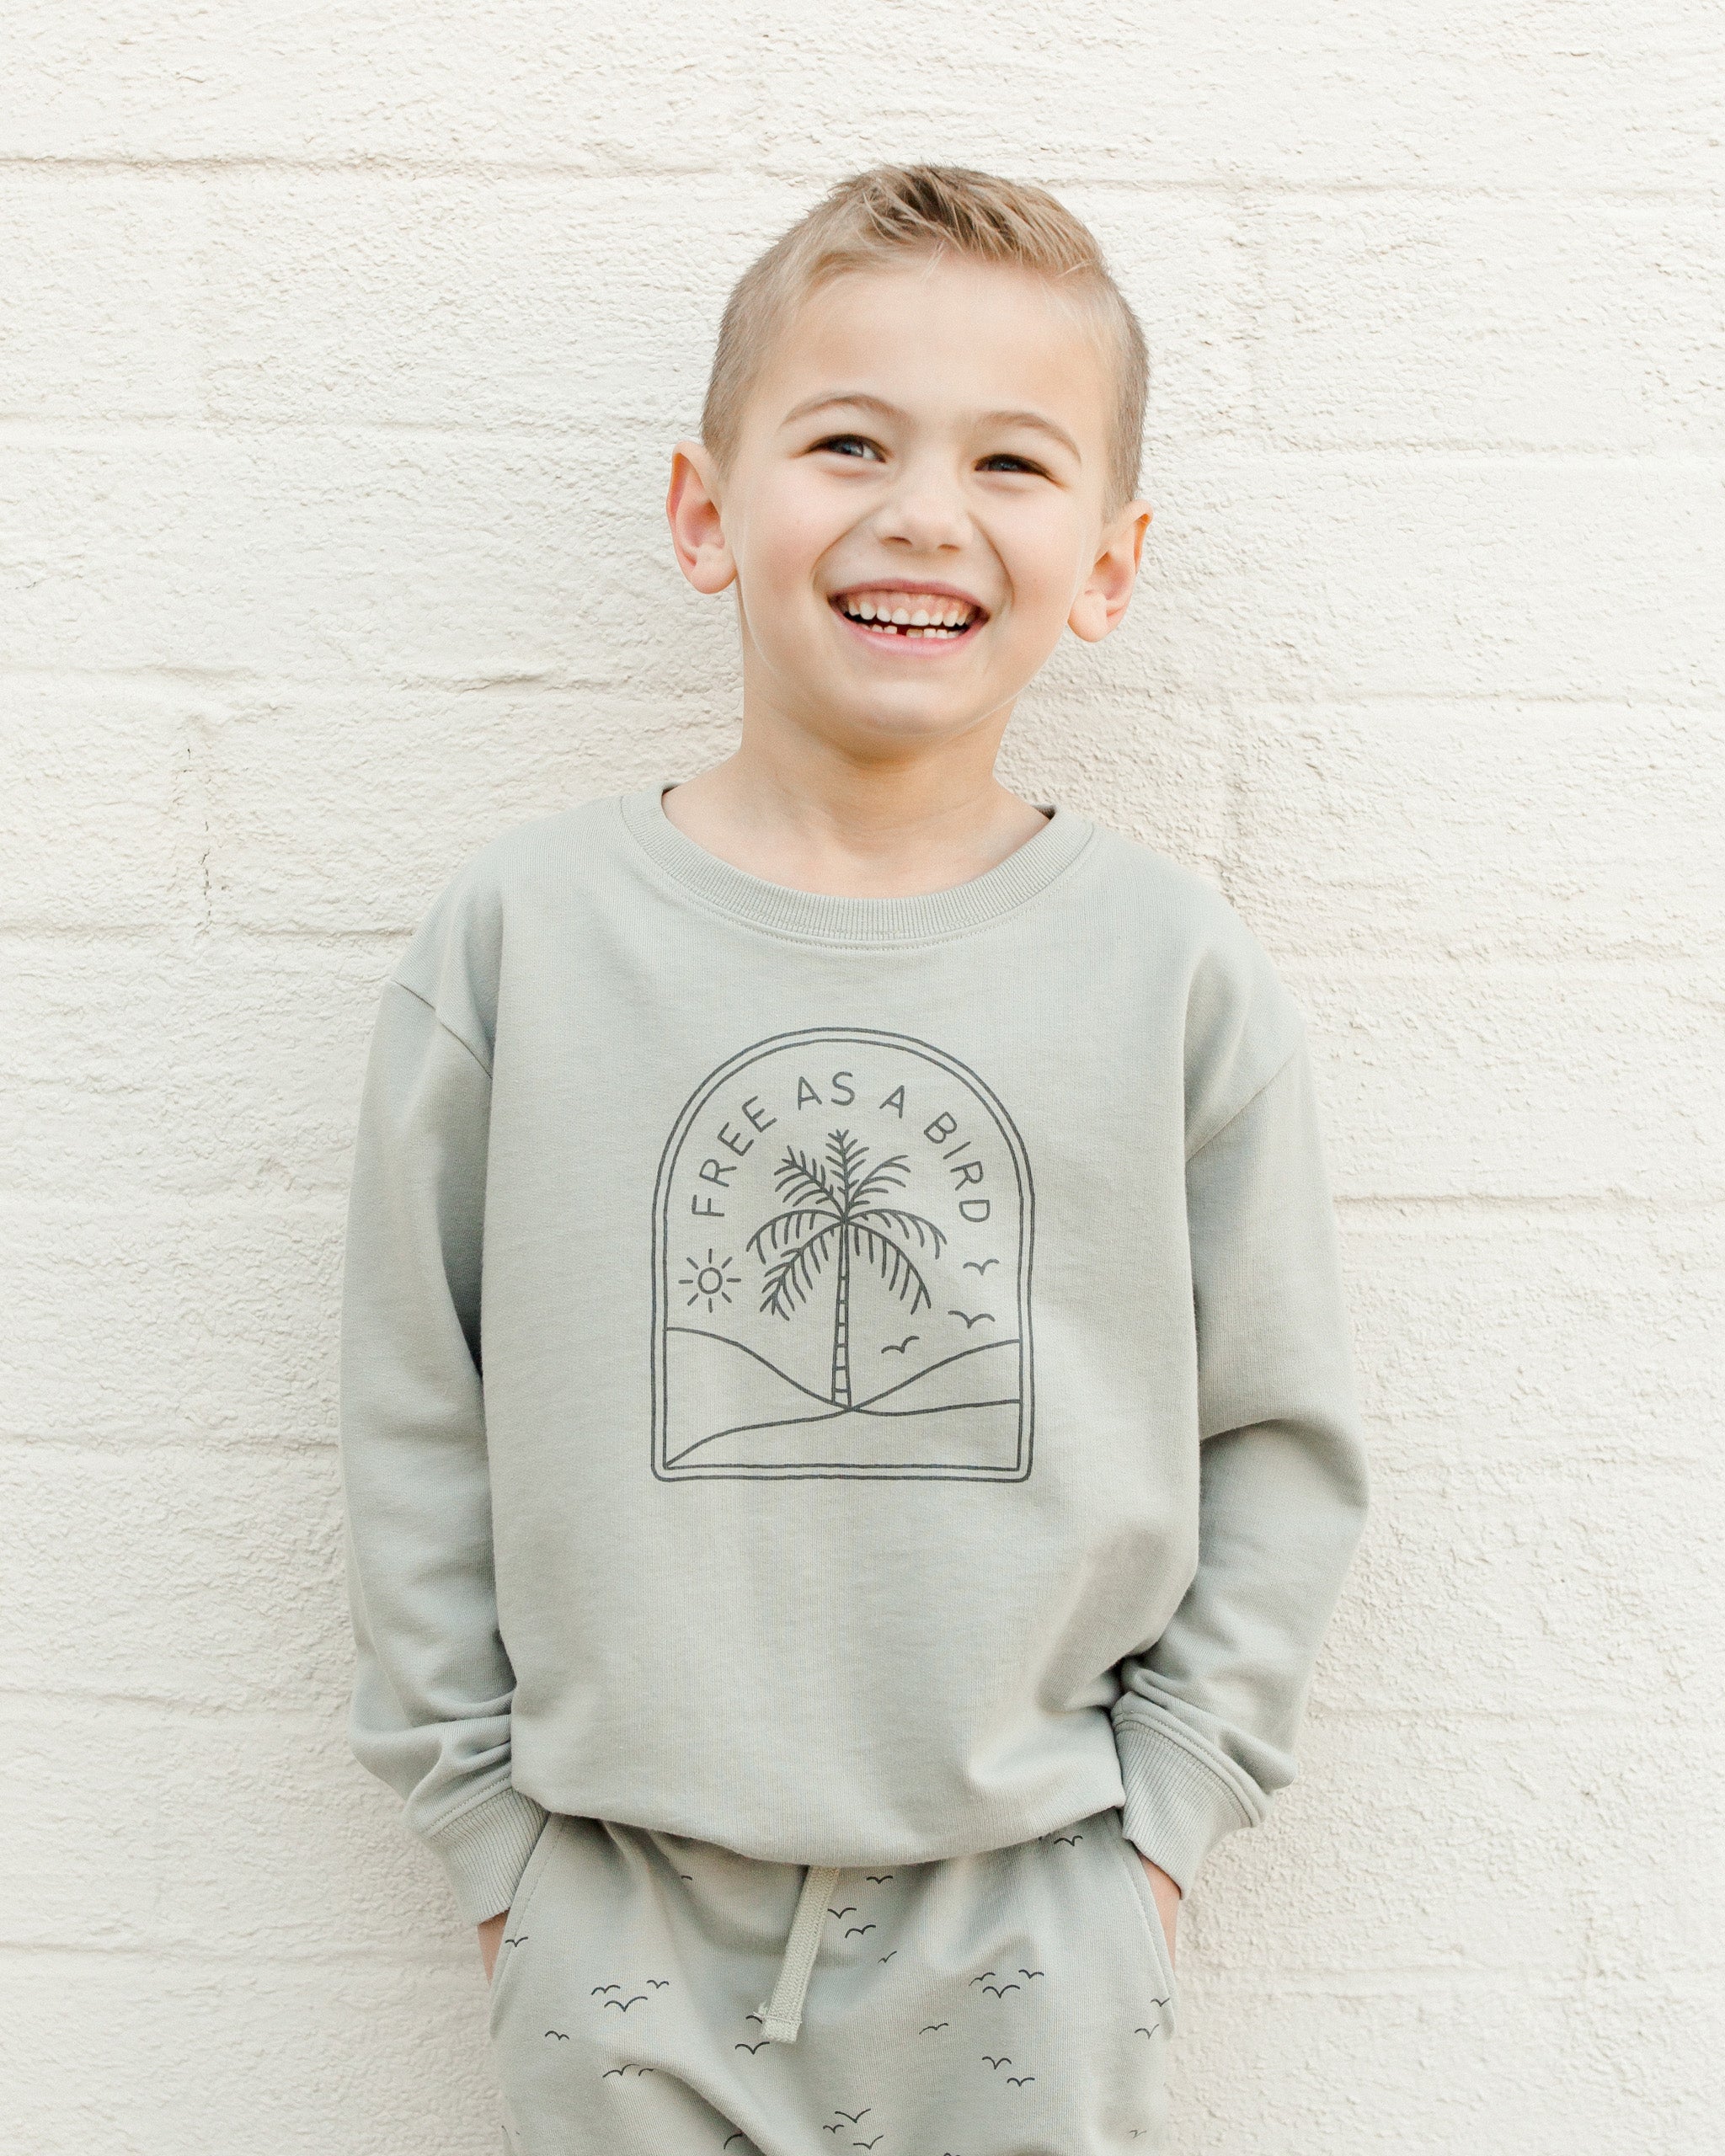 sweatshirt || free as a bird - Rylee + Cru | Kids Clothes | Trendy Baby Clothes | Modern Infant Outfits |